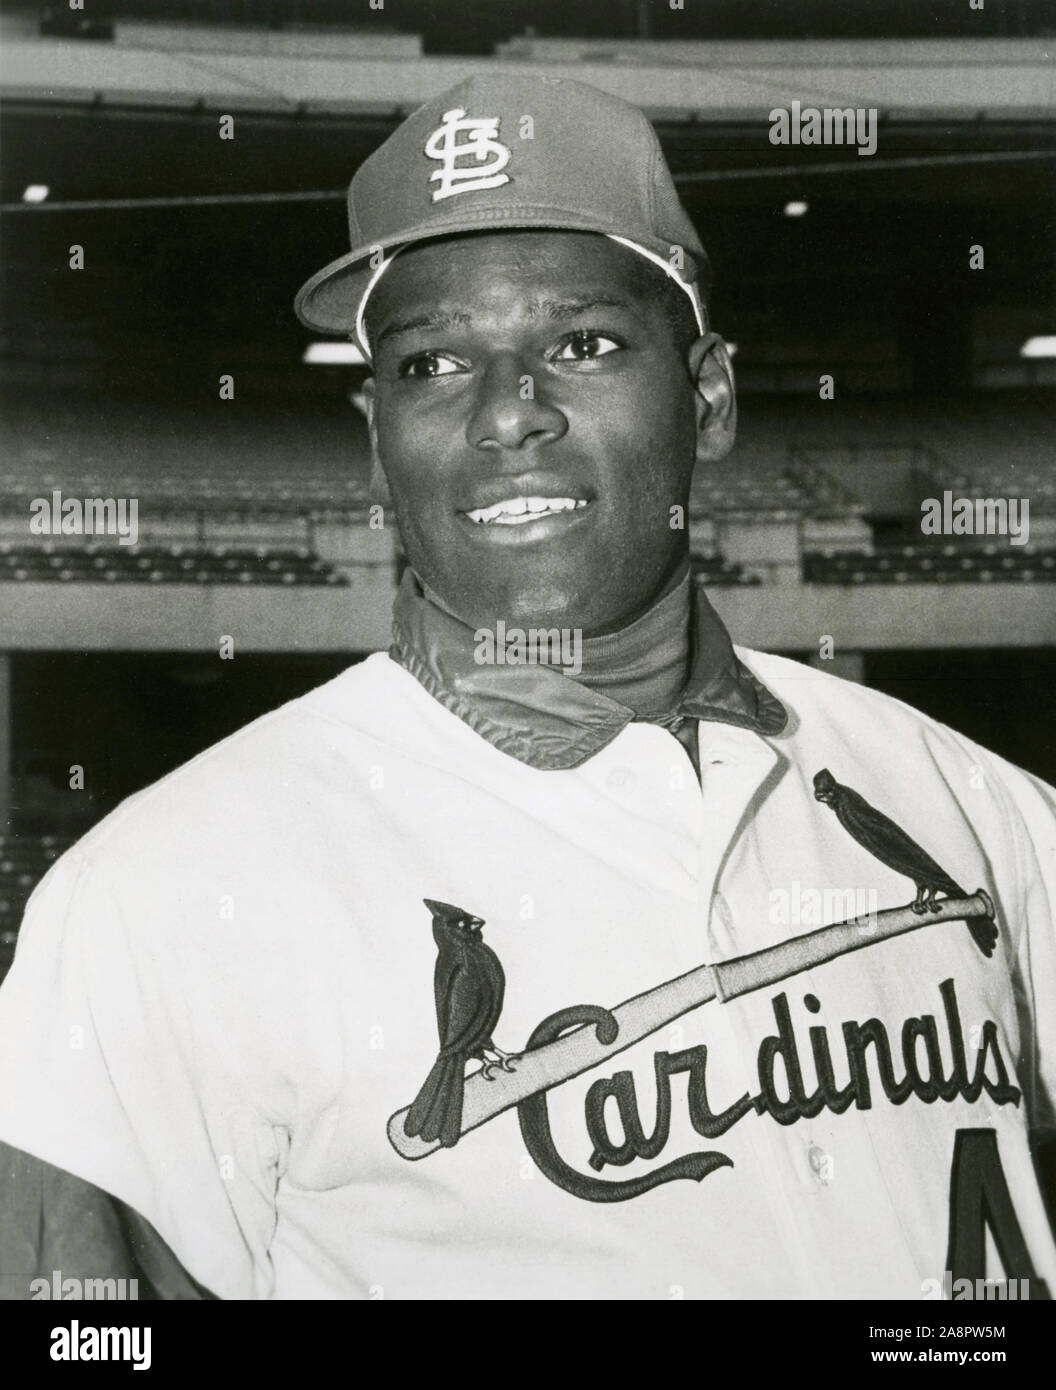 Vintage black and white photo of Hall of Fame pitcher Bob Gibson